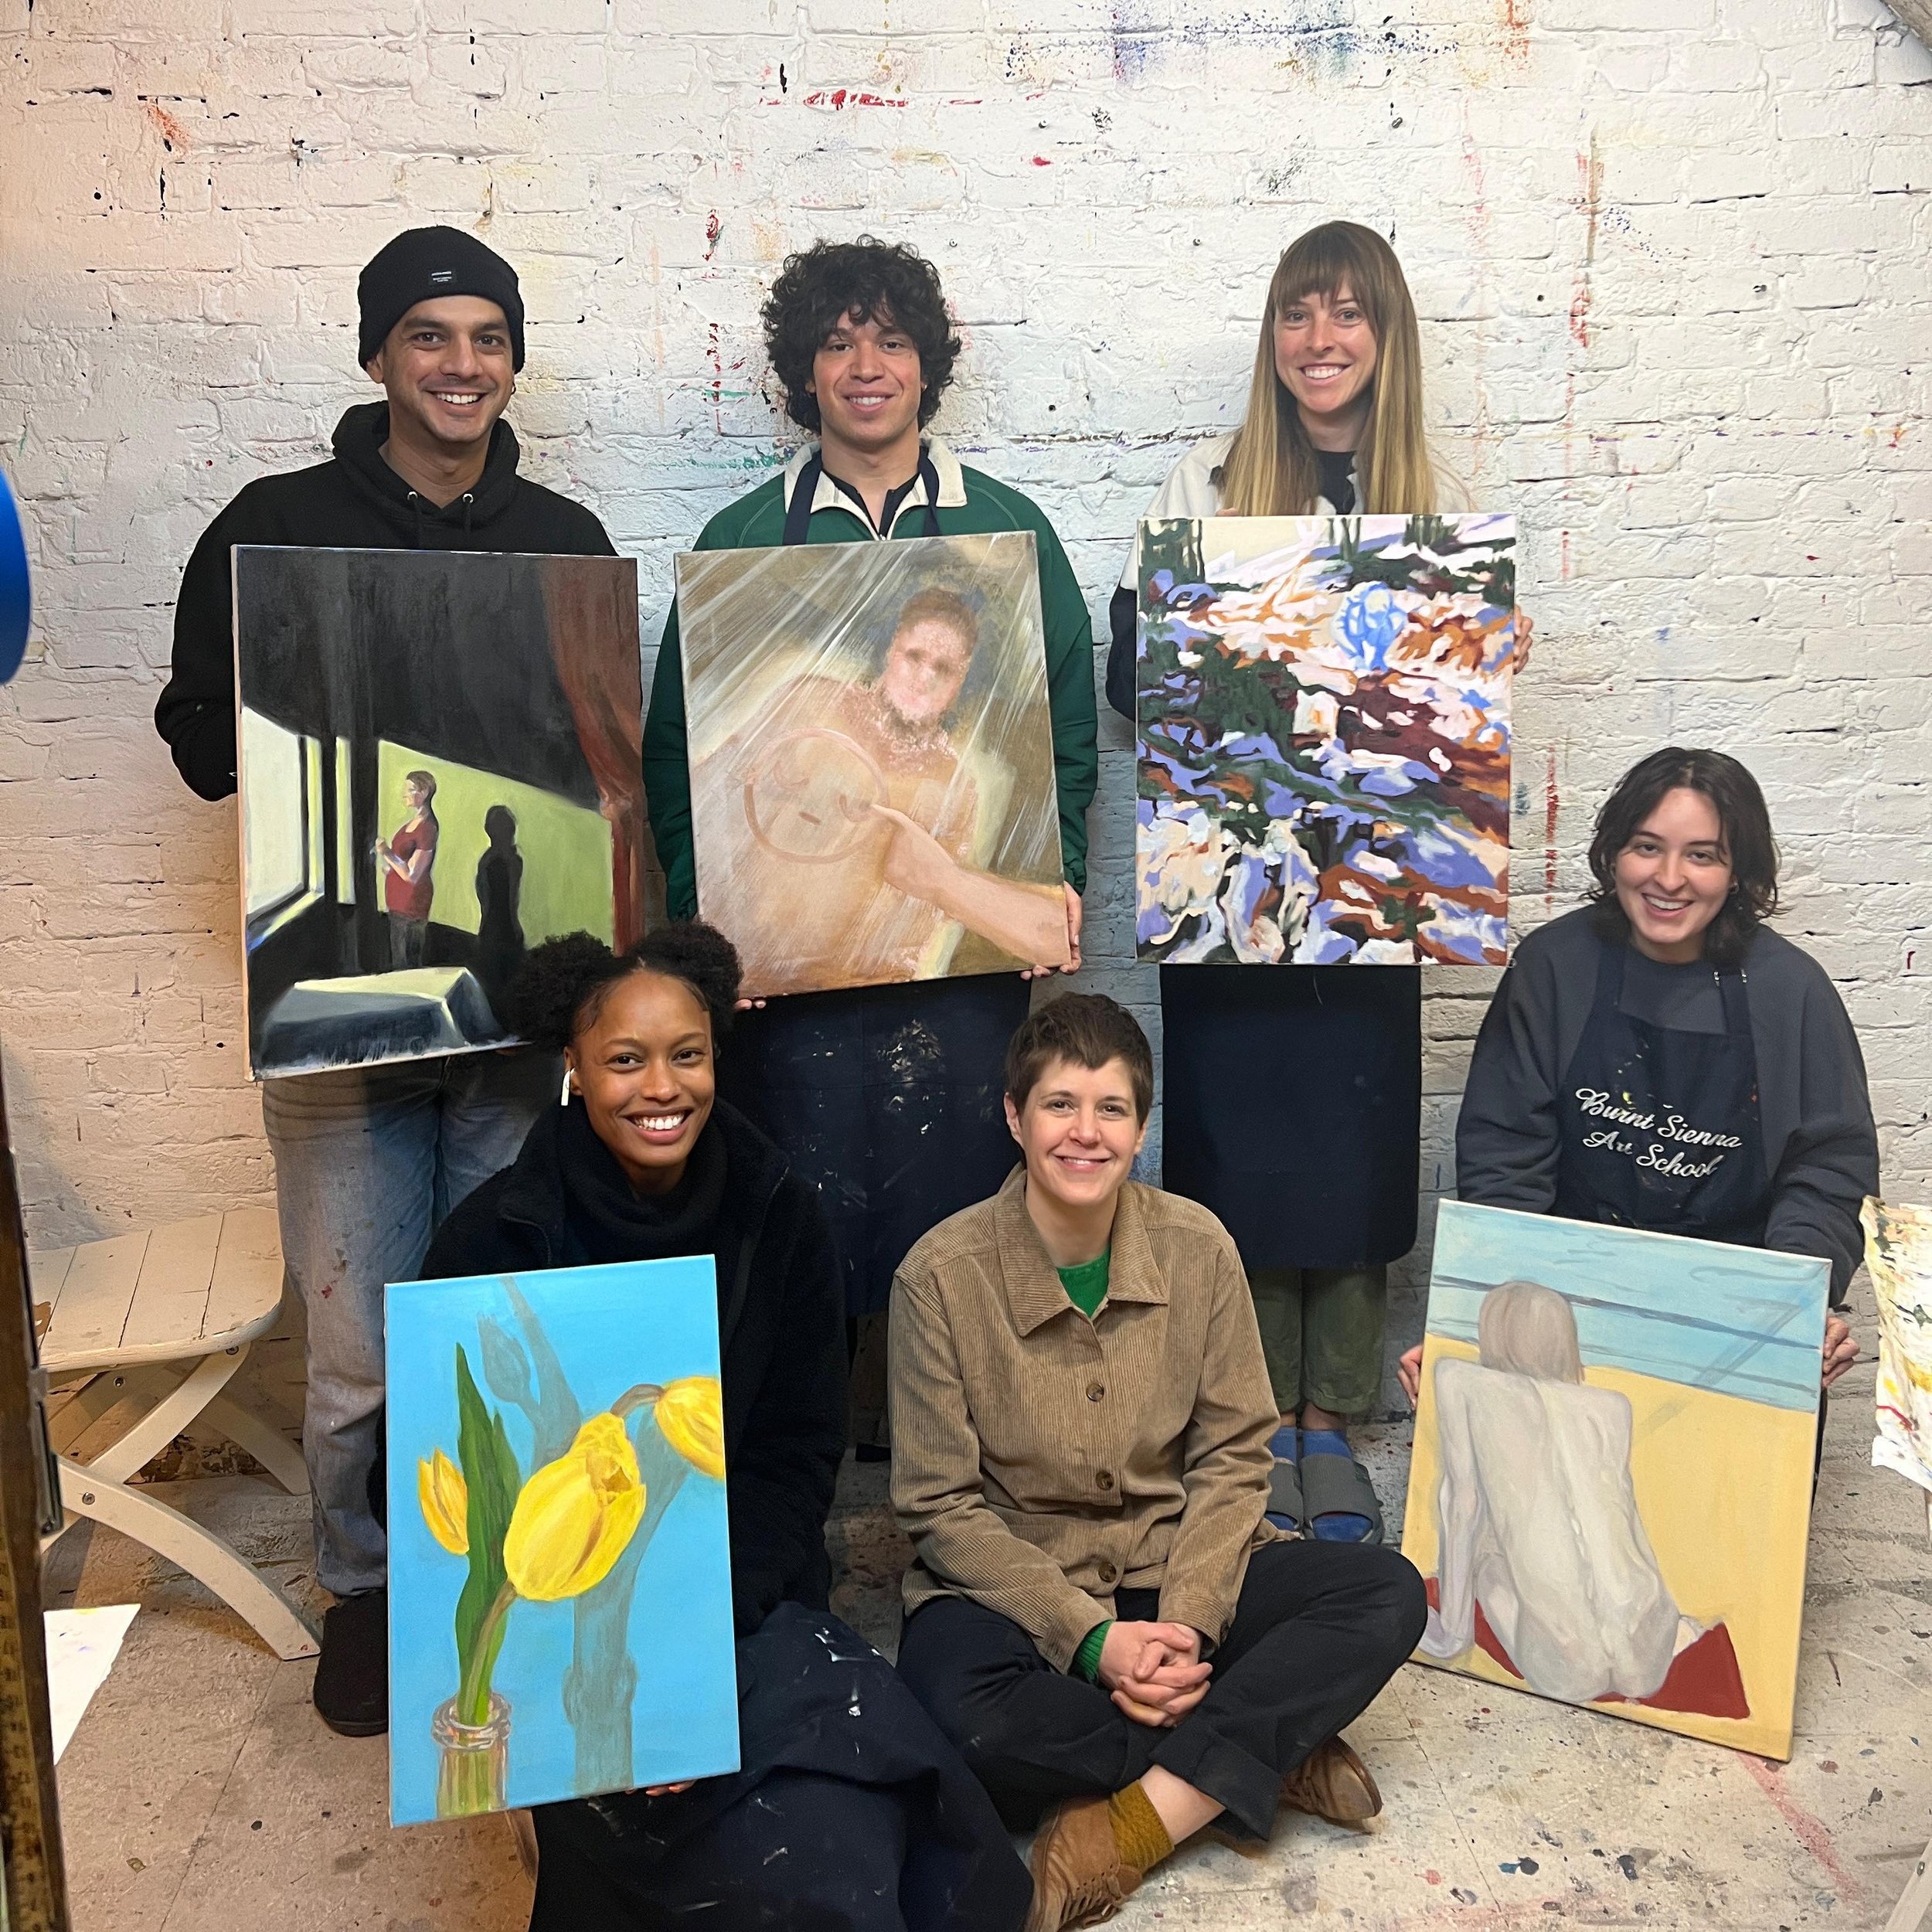 And just like that our spring foundation courses are finished! Our next round of foundation courses start end of May. We have just a couple spots available! 

Here&rsquo;s a picture of our Friday morning spring oil painting group with their finished 